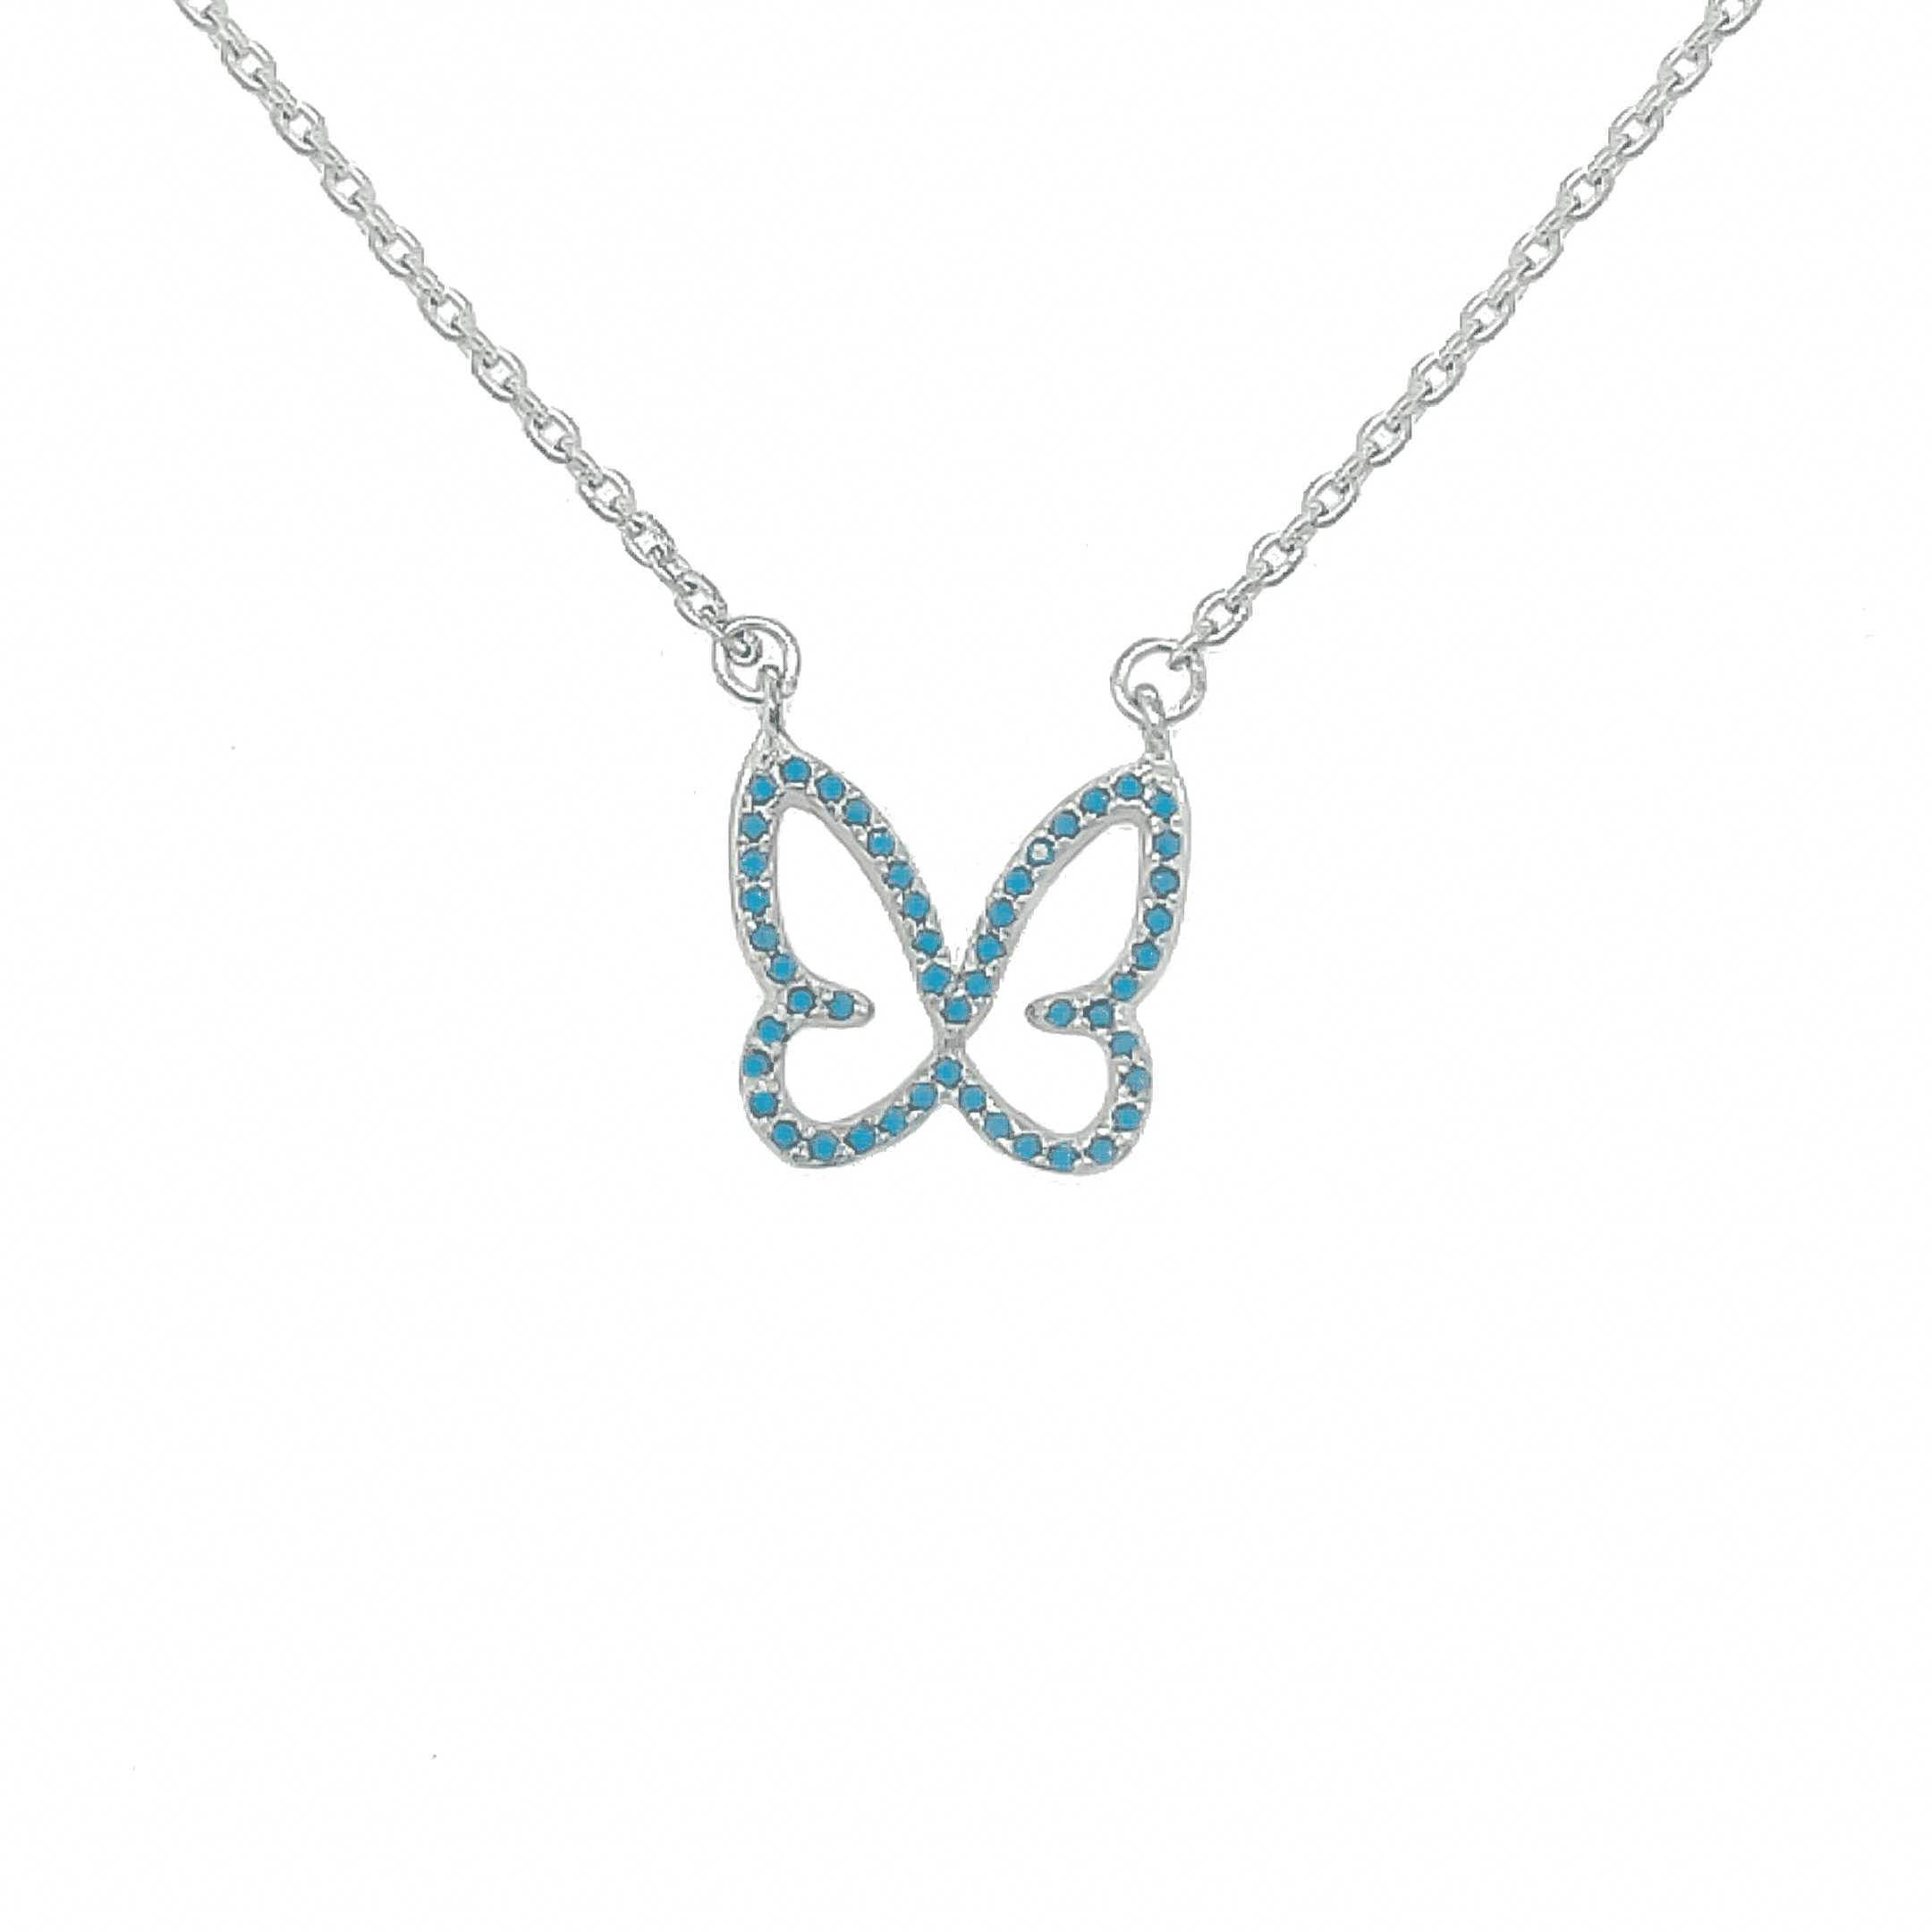 Asfour 925 Sterling Silver Necklace - NR0168-M